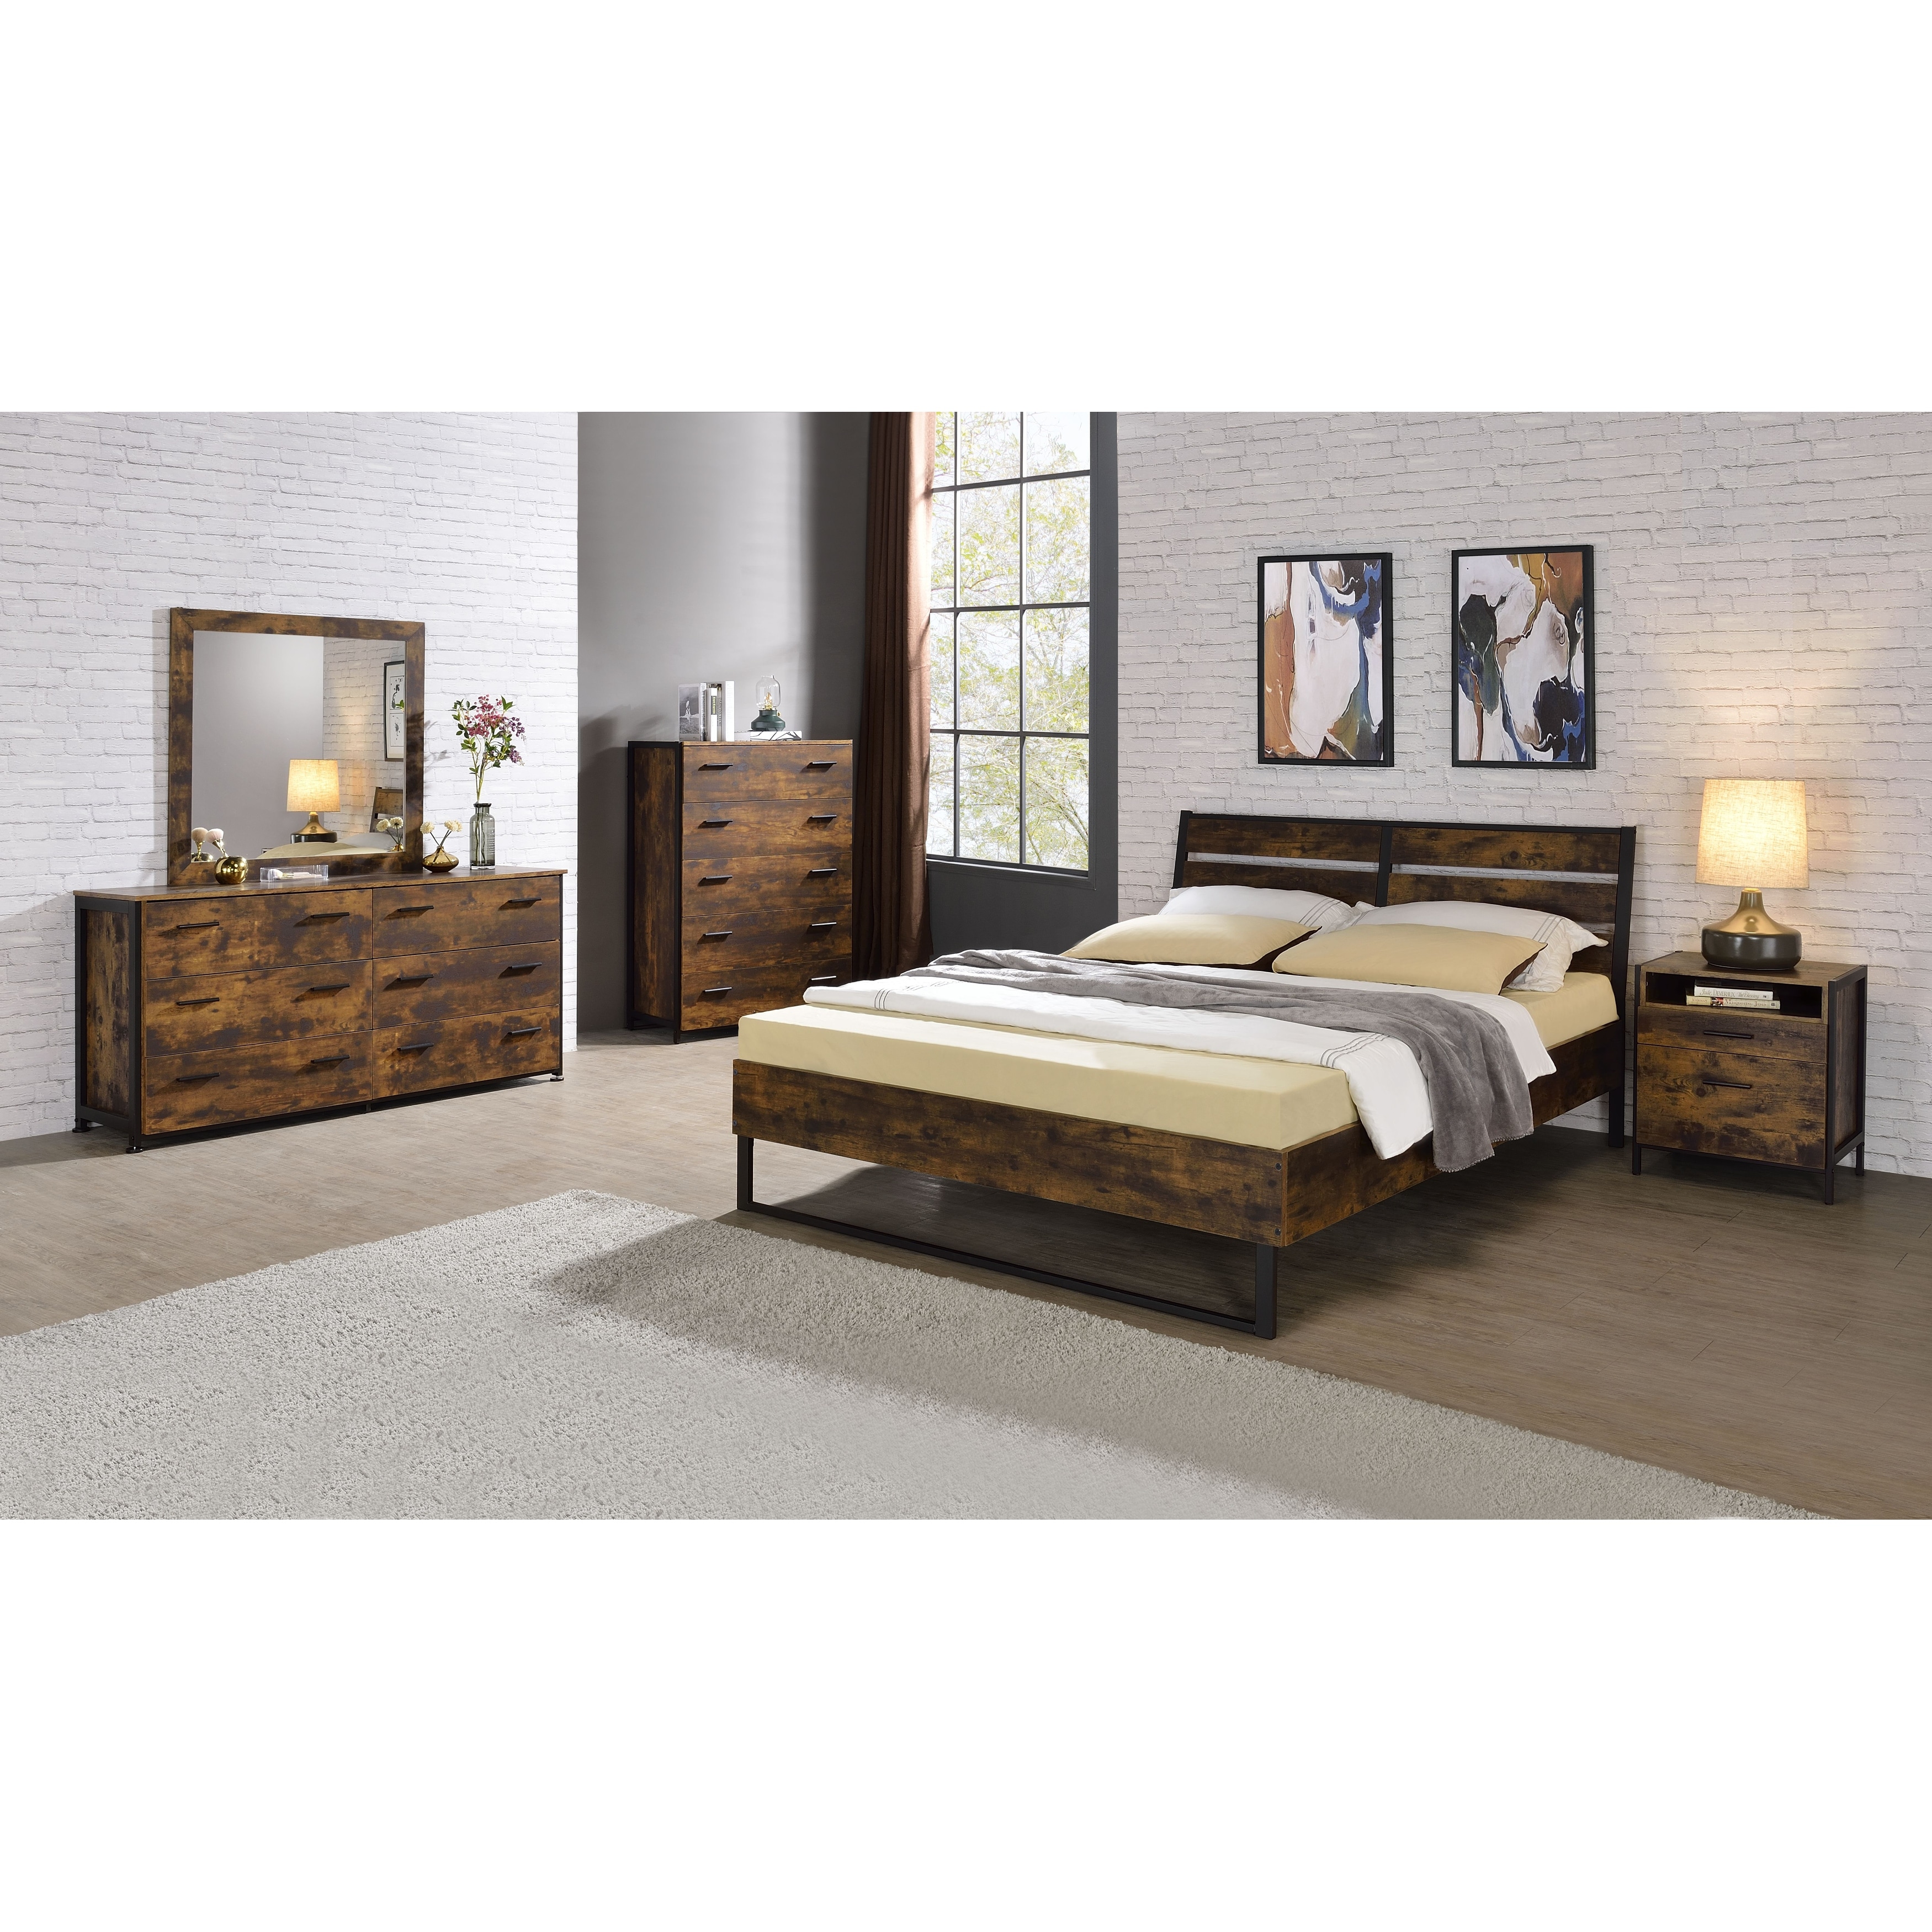 Juvanth Eastern King Bed With Metal Mesh Base And Slatted Headboard In Rustic Oak and Black Finish